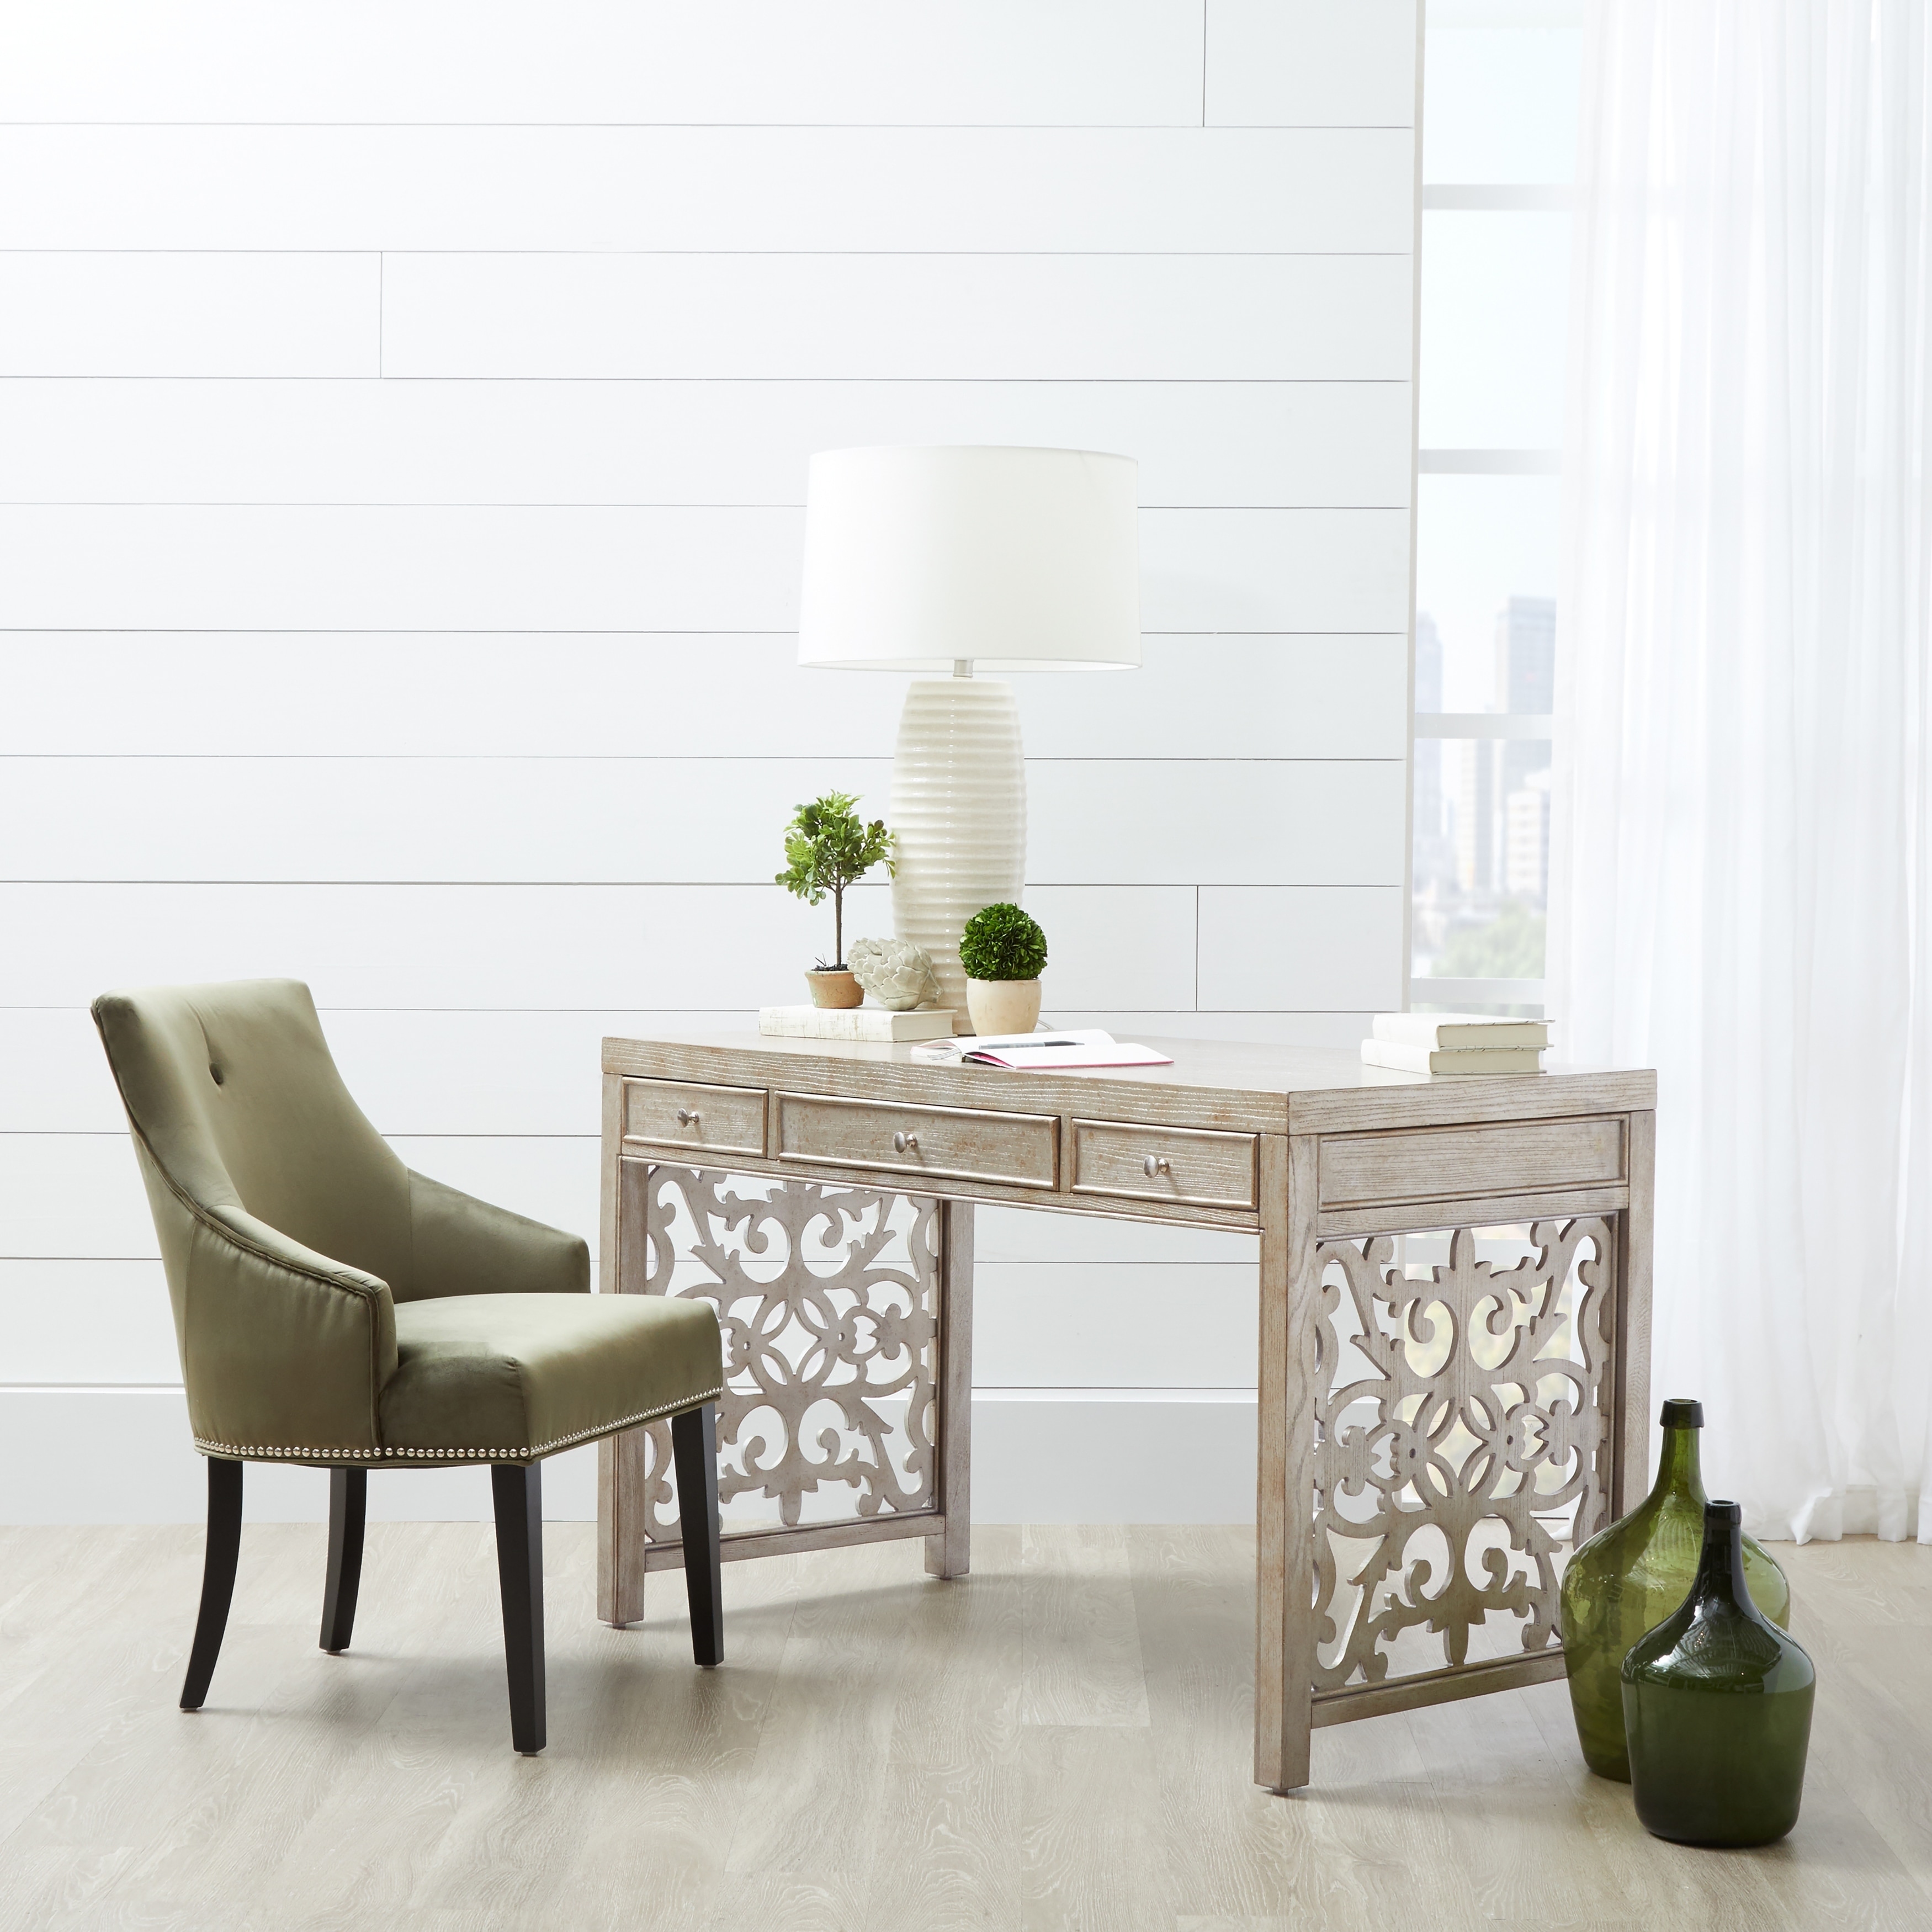 Moss Green Dining Room Chairs : This side chair is perfectly suited in